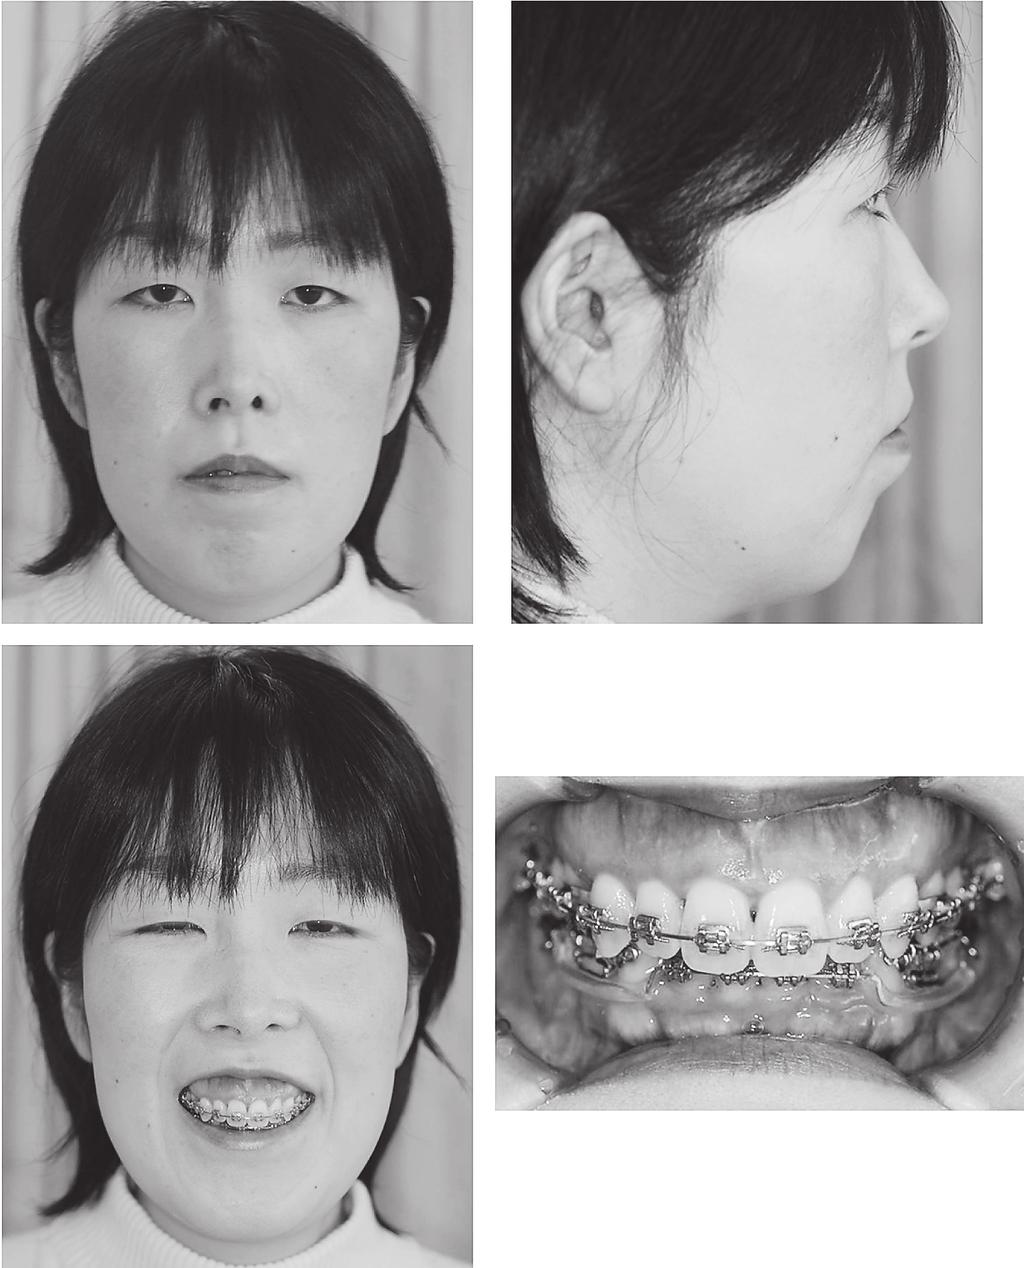 56 Shimo et l. Act Med. Okym Vol. 67, No. 1 impction cses [9, 10]. However, there re few reports out cses of severe gummy smile.